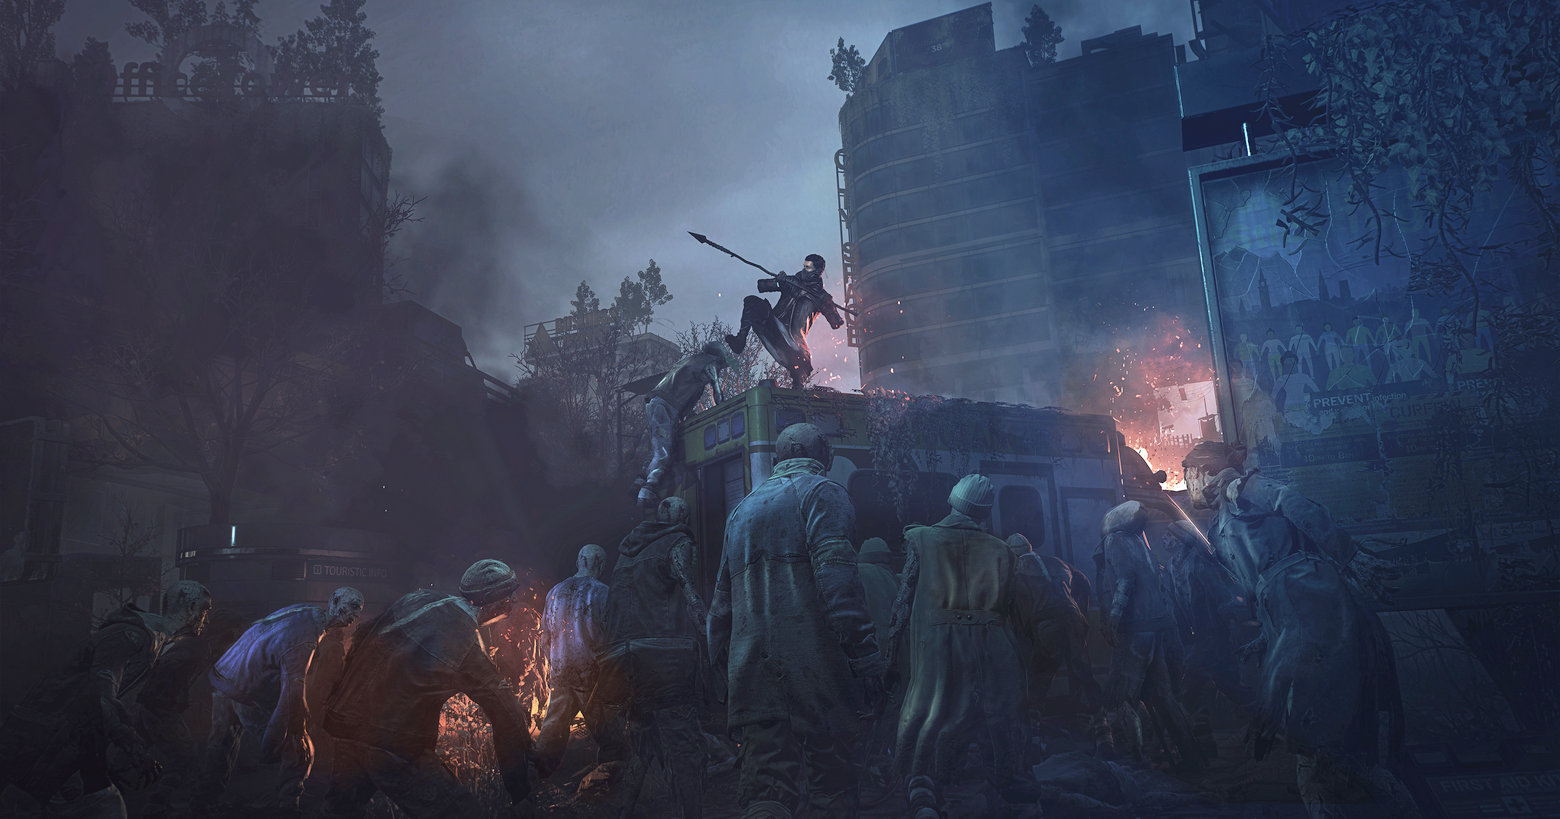 In this screenshot from Dying Light 2: Stay Human, we see the player in the center of the screen, armed with a spear, in a long shot in a gloomy post-apocalyptic city. He is standing on an abandoned ambulance overgrown with plants and is kicking down a zombie that is climbing up. The entire image is shrouded in smoke and we can make out isolated buildings in the clouds of smoke. In the background, a skyscraper is on fire. In the foreground, numerous zombies stand around the ambulance, trying to reach the player. This title is one of the best scary games to play with friends and one of the most sought-after co-op horror games today.